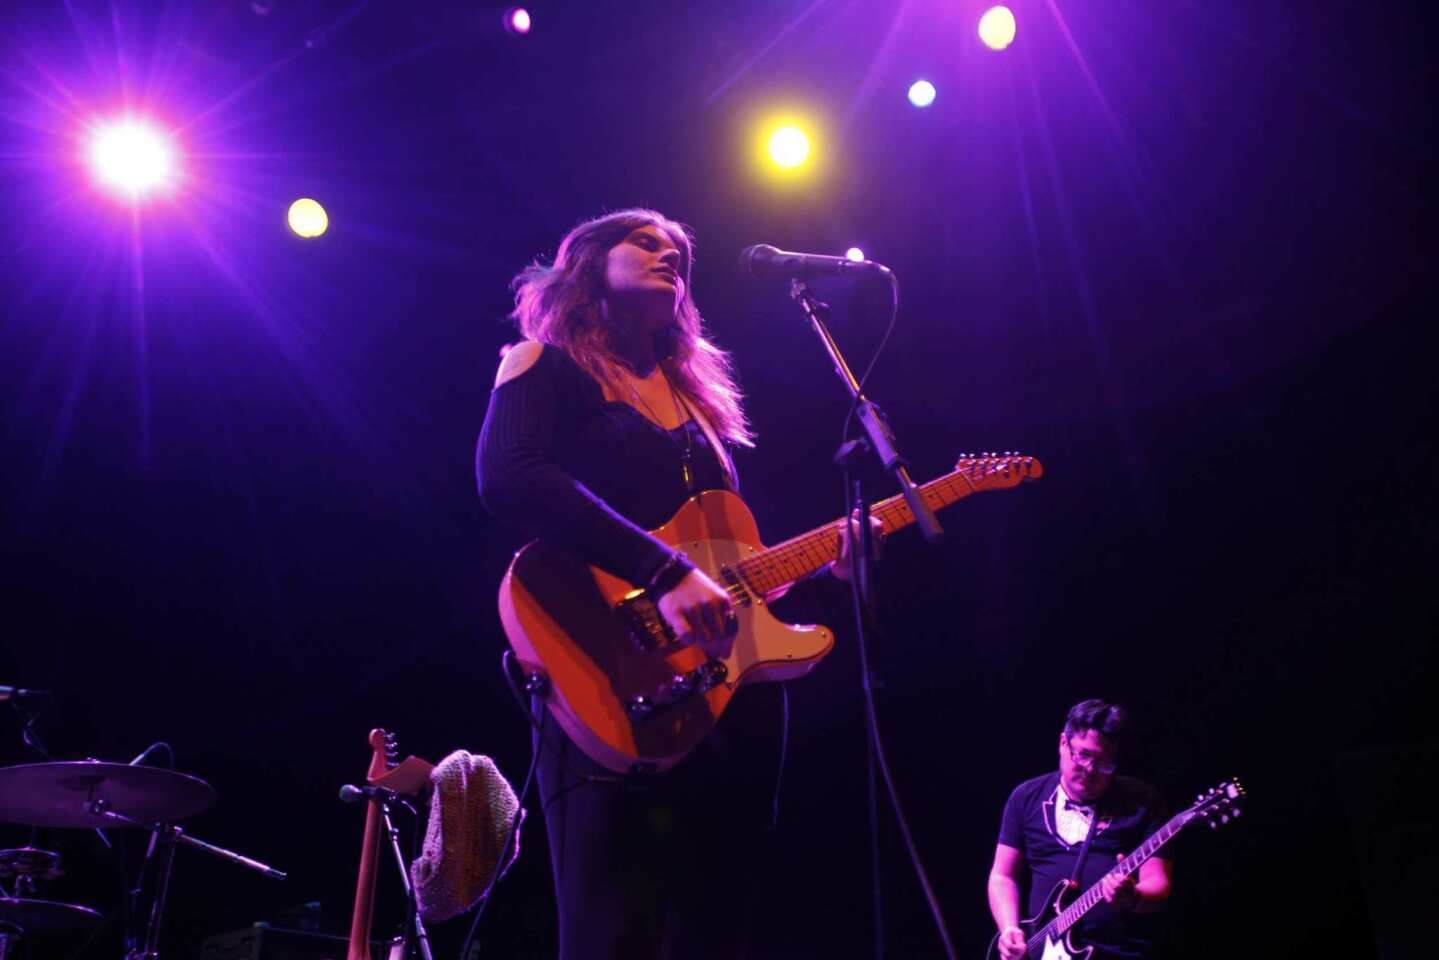 OVERRATED: Best Coast's 'The Only Place'